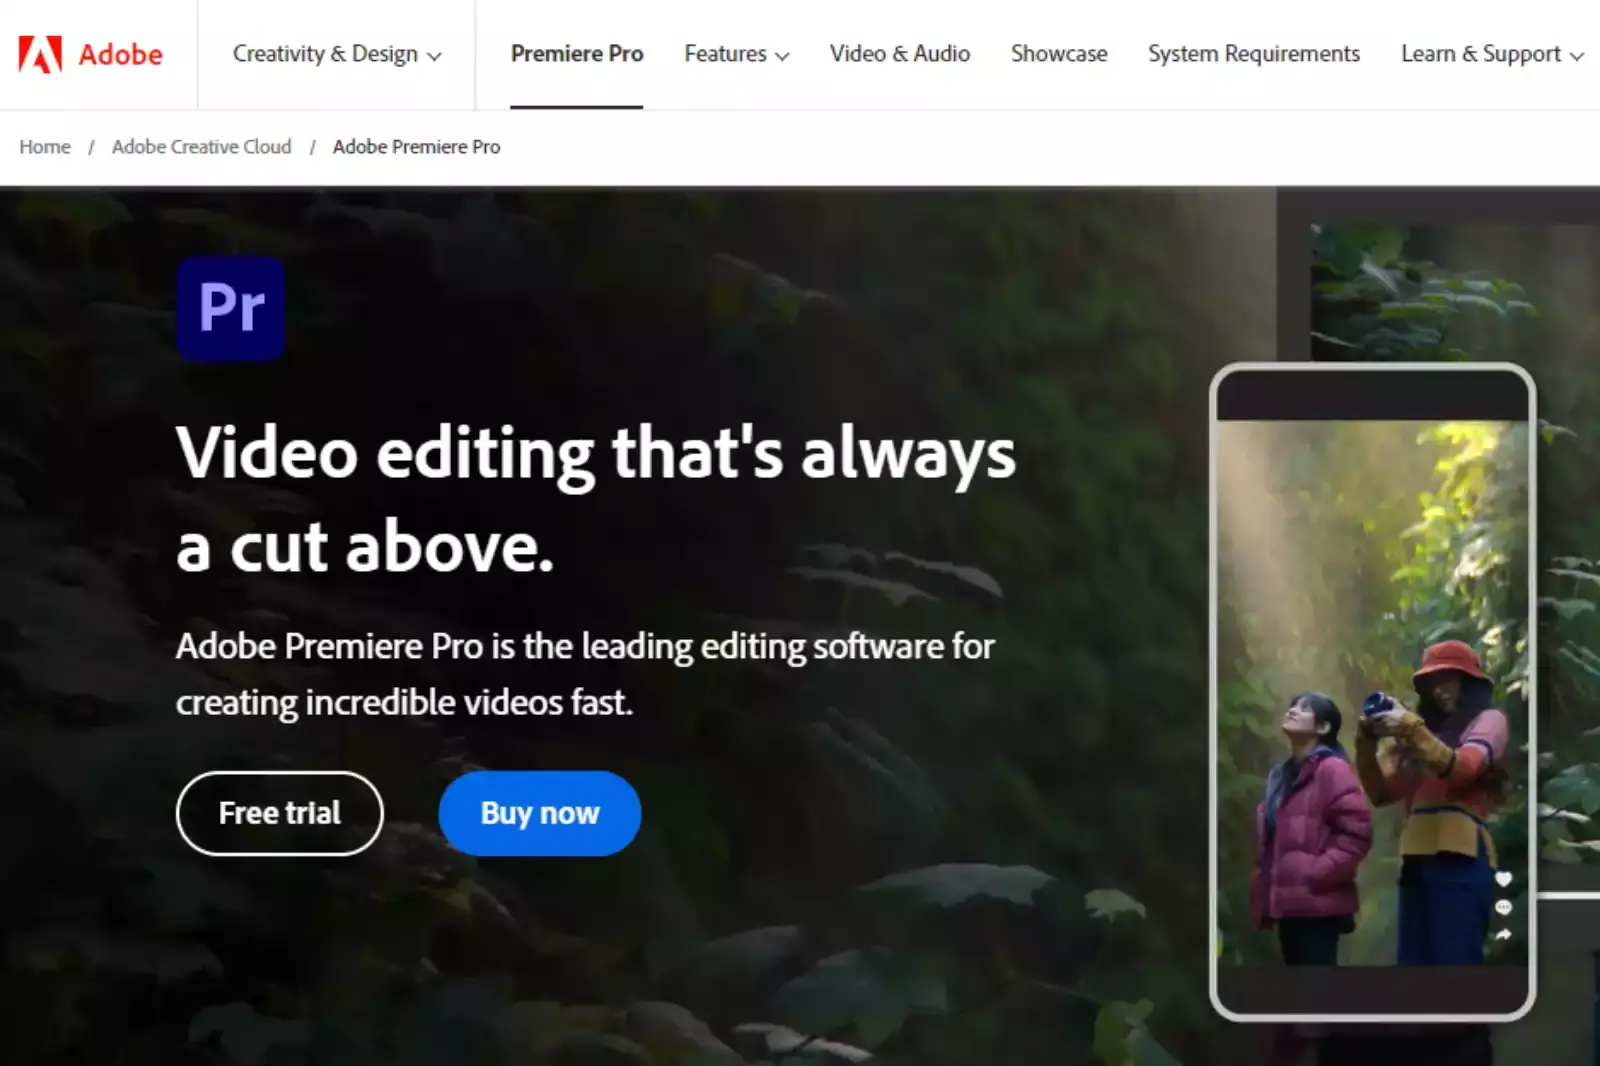 Home Page of Premier Pro